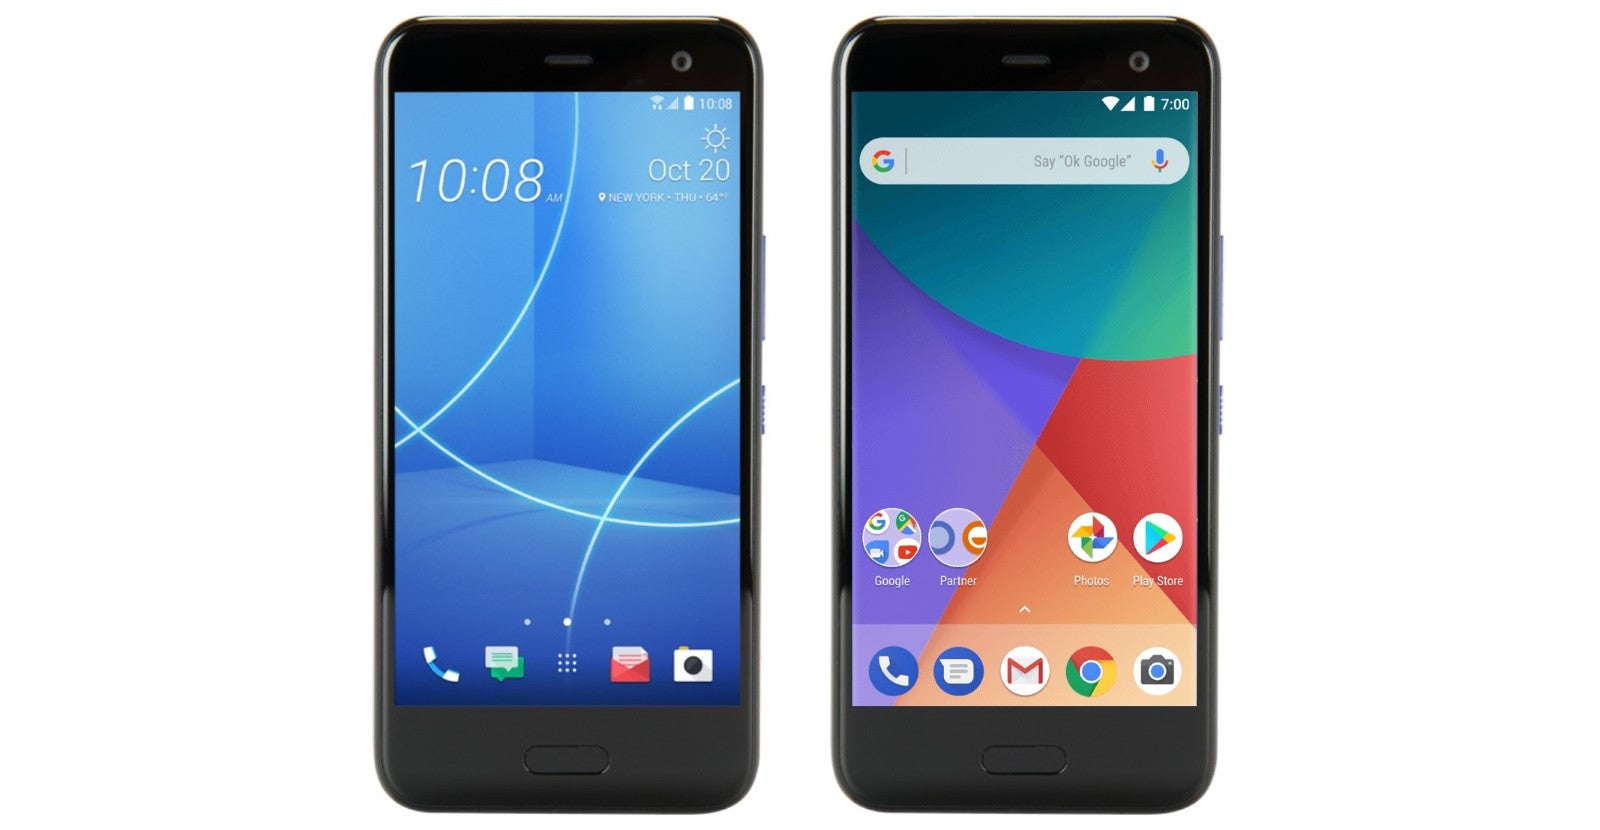 HTC U11 Life vs. Android One model - HTC to launch an Android One version of U11 Life (aka Ocean Life)